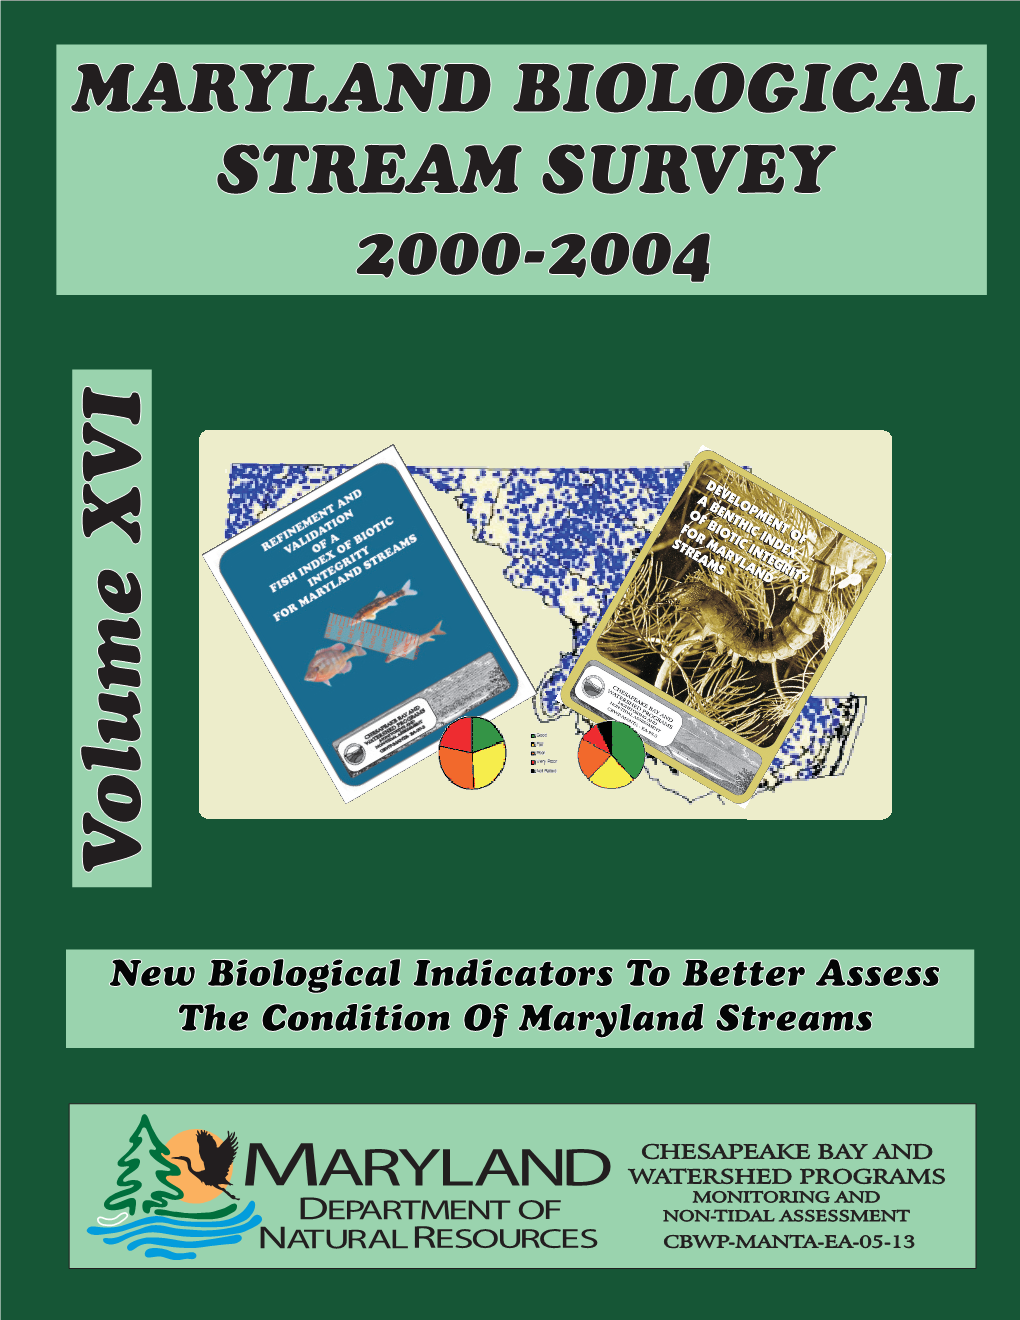 New Biological Indicators to Better Assess the Condition of Maryland Streams